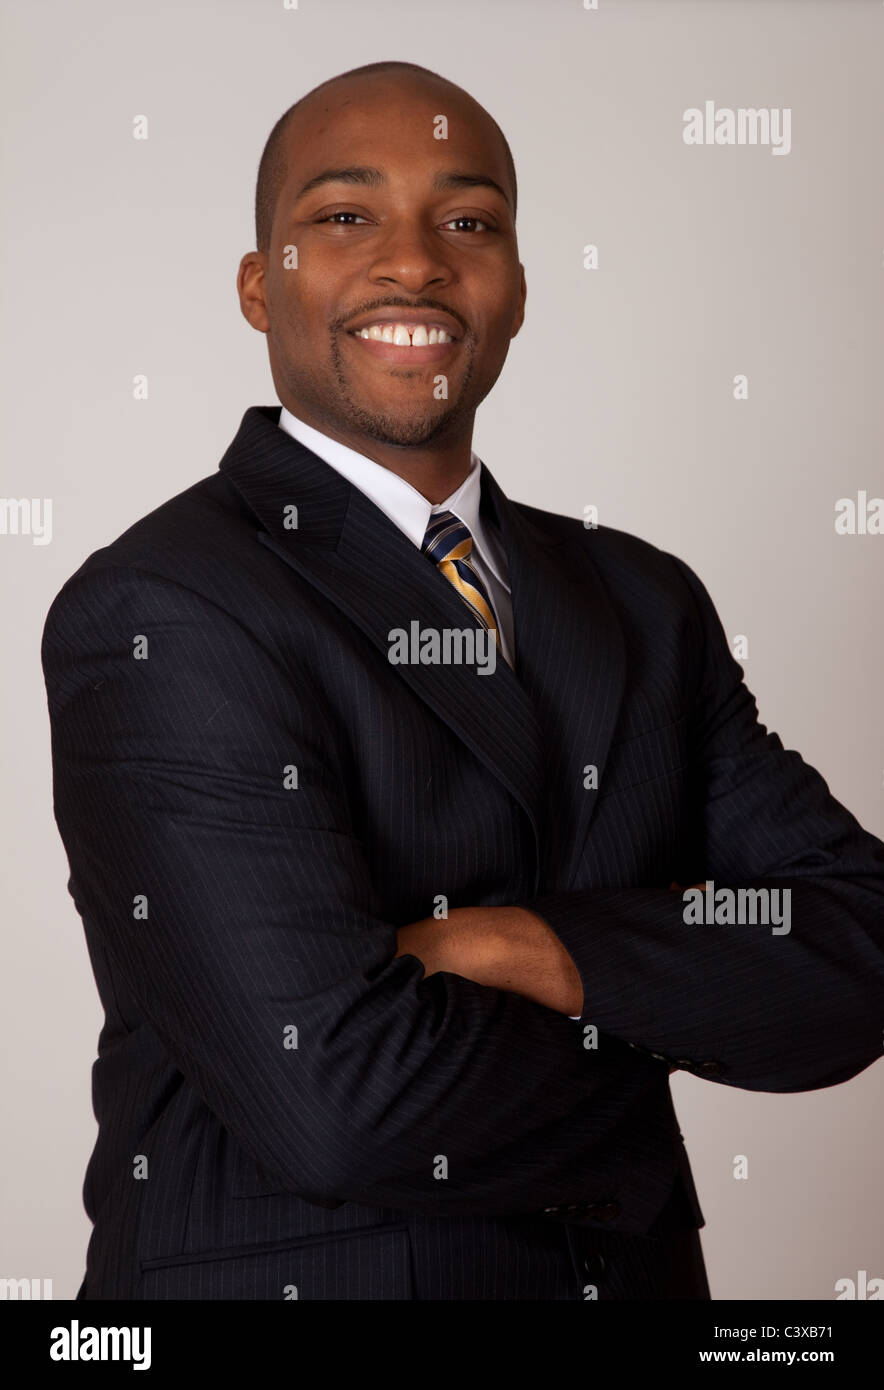 Confident, assured Black businessman with arms folded across his chest and a smile Stock Photo